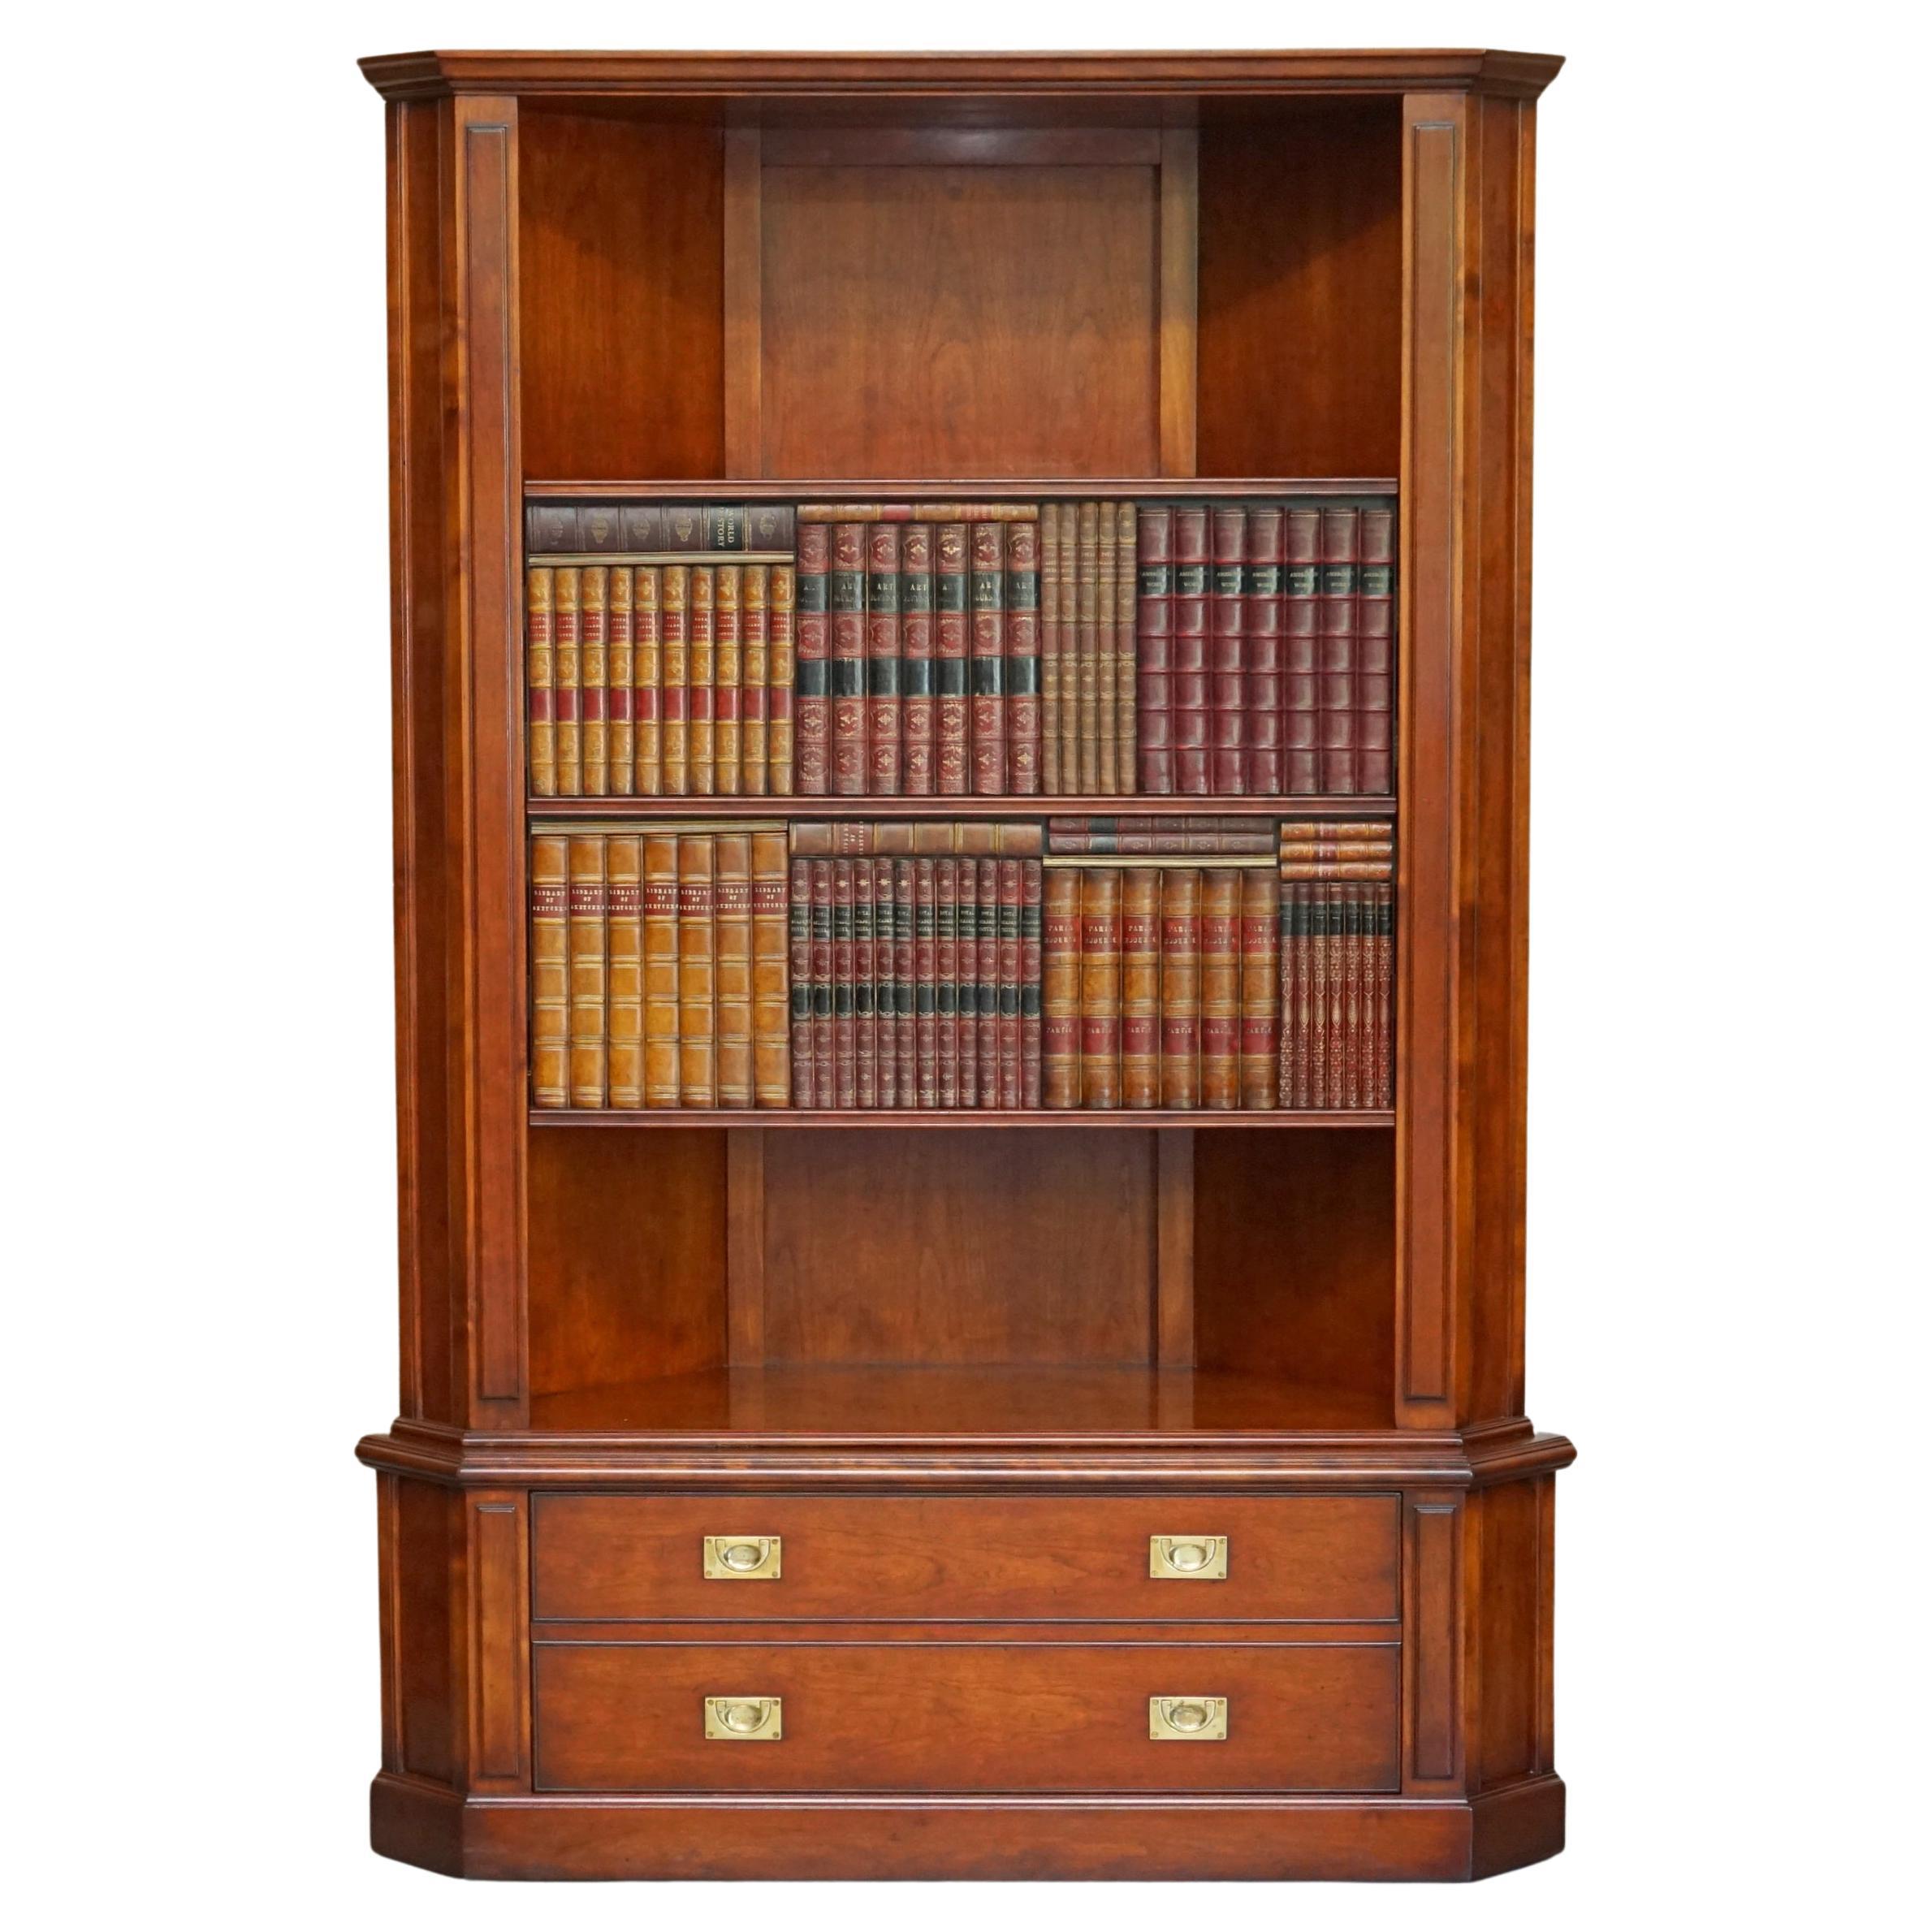 Very Rare Harrods London Kennedy Hardwood Bookcase Tv Media Cabinet Faux Books For Sale